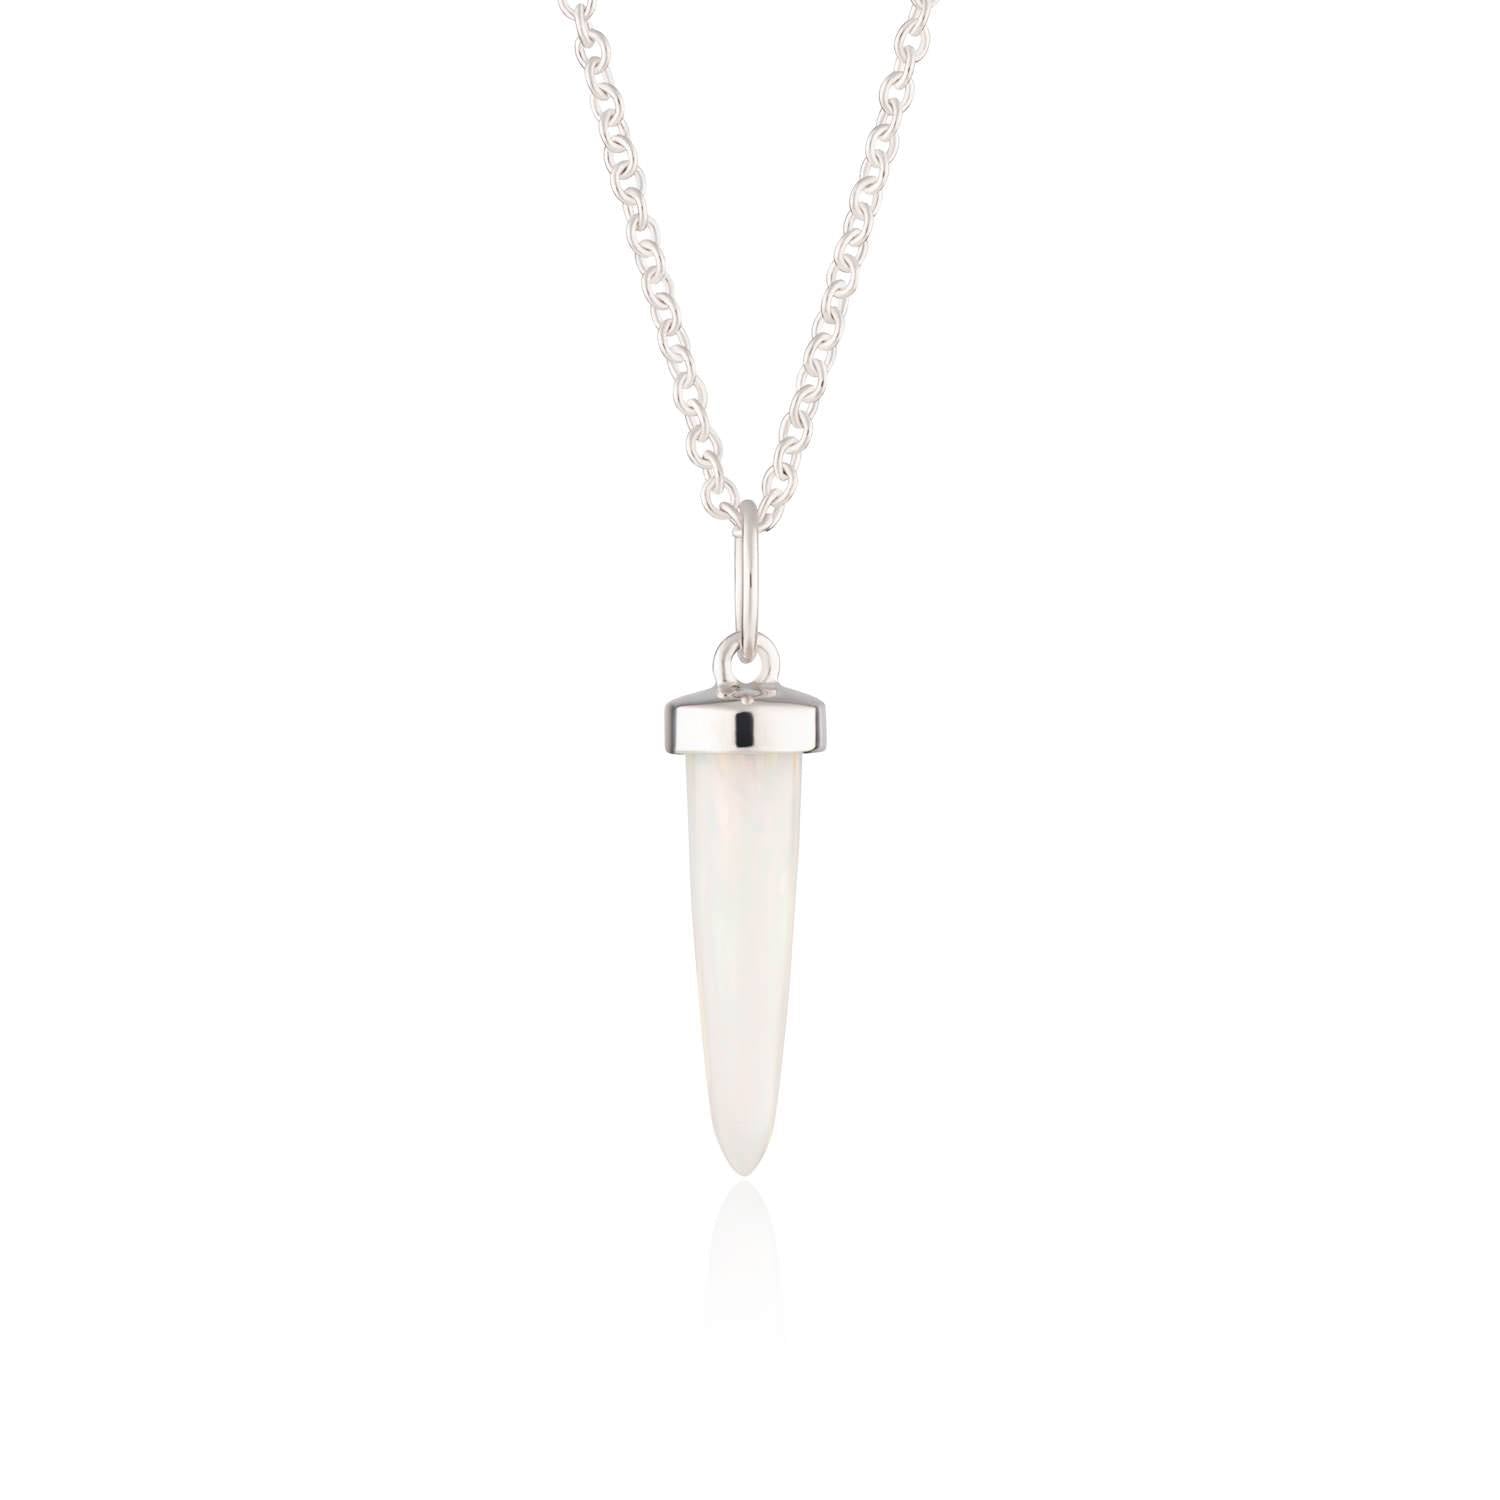 White Opal Spike Necklace with Slider Clasp